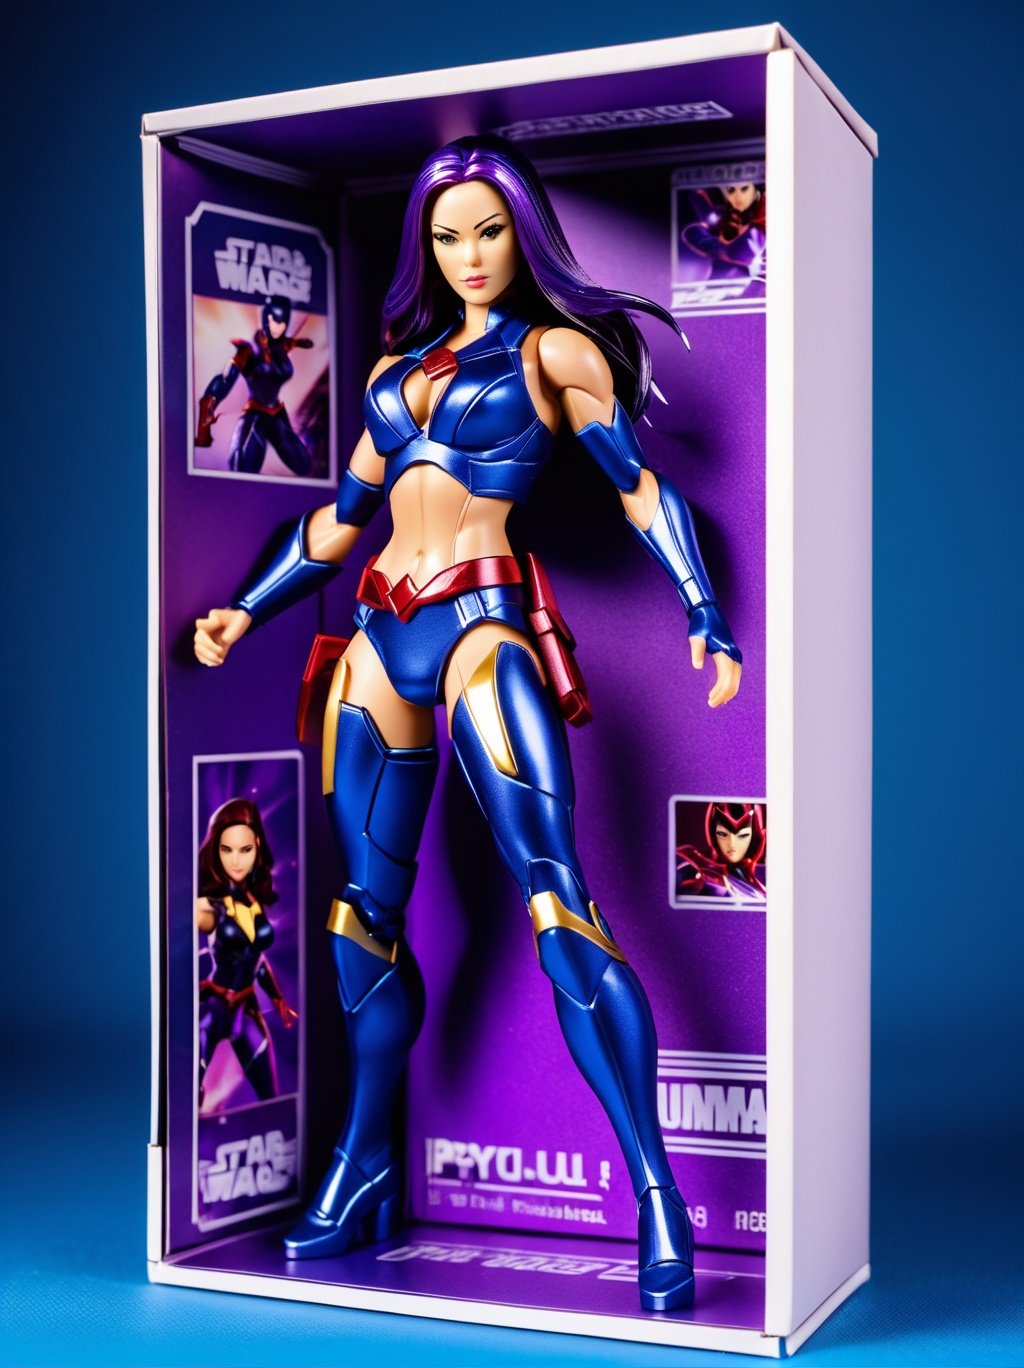 ActionFigureQuiron style, action figure, toy, doll, character print, (best quality:1.15), (masterpiece:1.15), (detailed:1.15), (realistic:1.2), (intricate:1.4), simple background, cover page, card, in a gift box, no humans, ( psylocke ), gift box, playset, in a box, full body, toy playset pack, in a gift box, premium playset toy box,<lyco:SDXL1.0_quiron_ActionFigure_v3_lycoris:0.87>